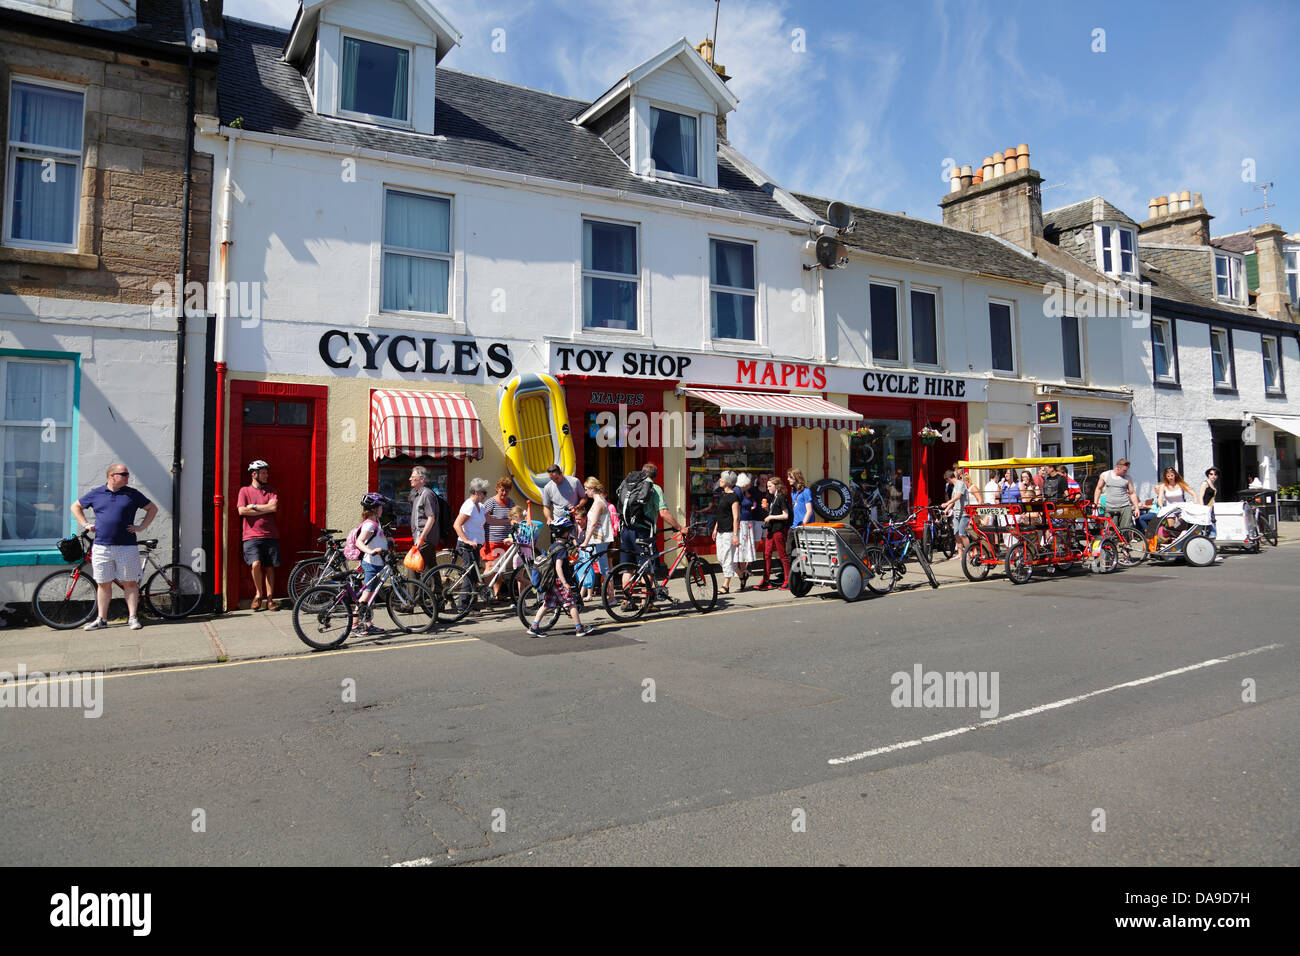 Millport, North Ayrshire, Scotland, UK, Monday, 8th July, 2013. Visitors in warm sunshine at Mapes Cycle Hire Shop in the town of Millport on the island of Great Cumbrae in the Firth of Clyde Stock Photo